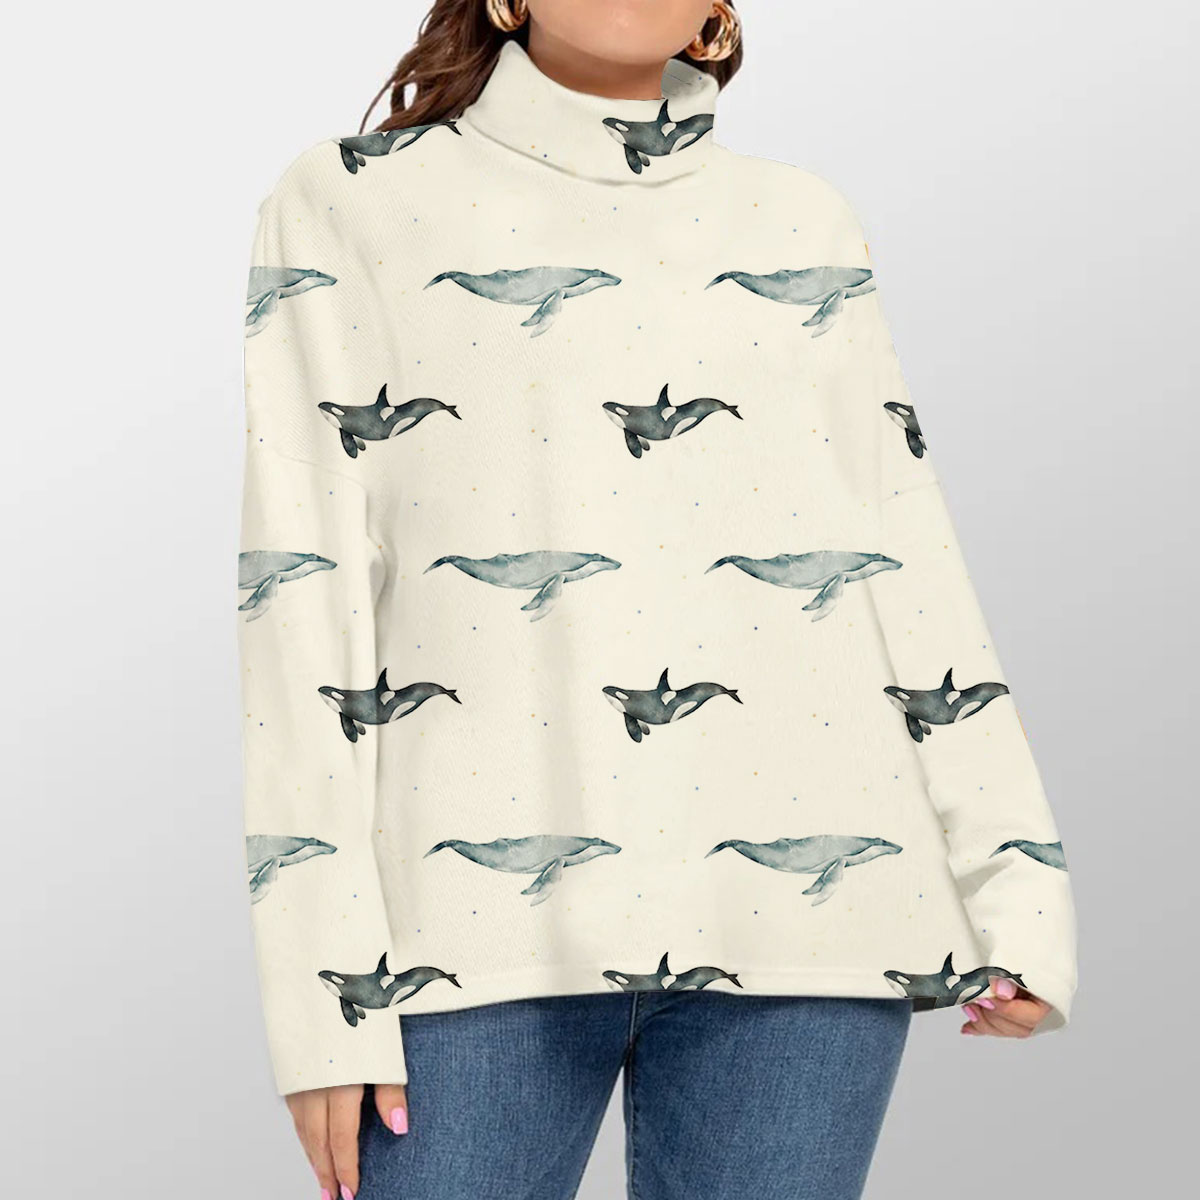 Orca And Whale Turtleneck Sweater